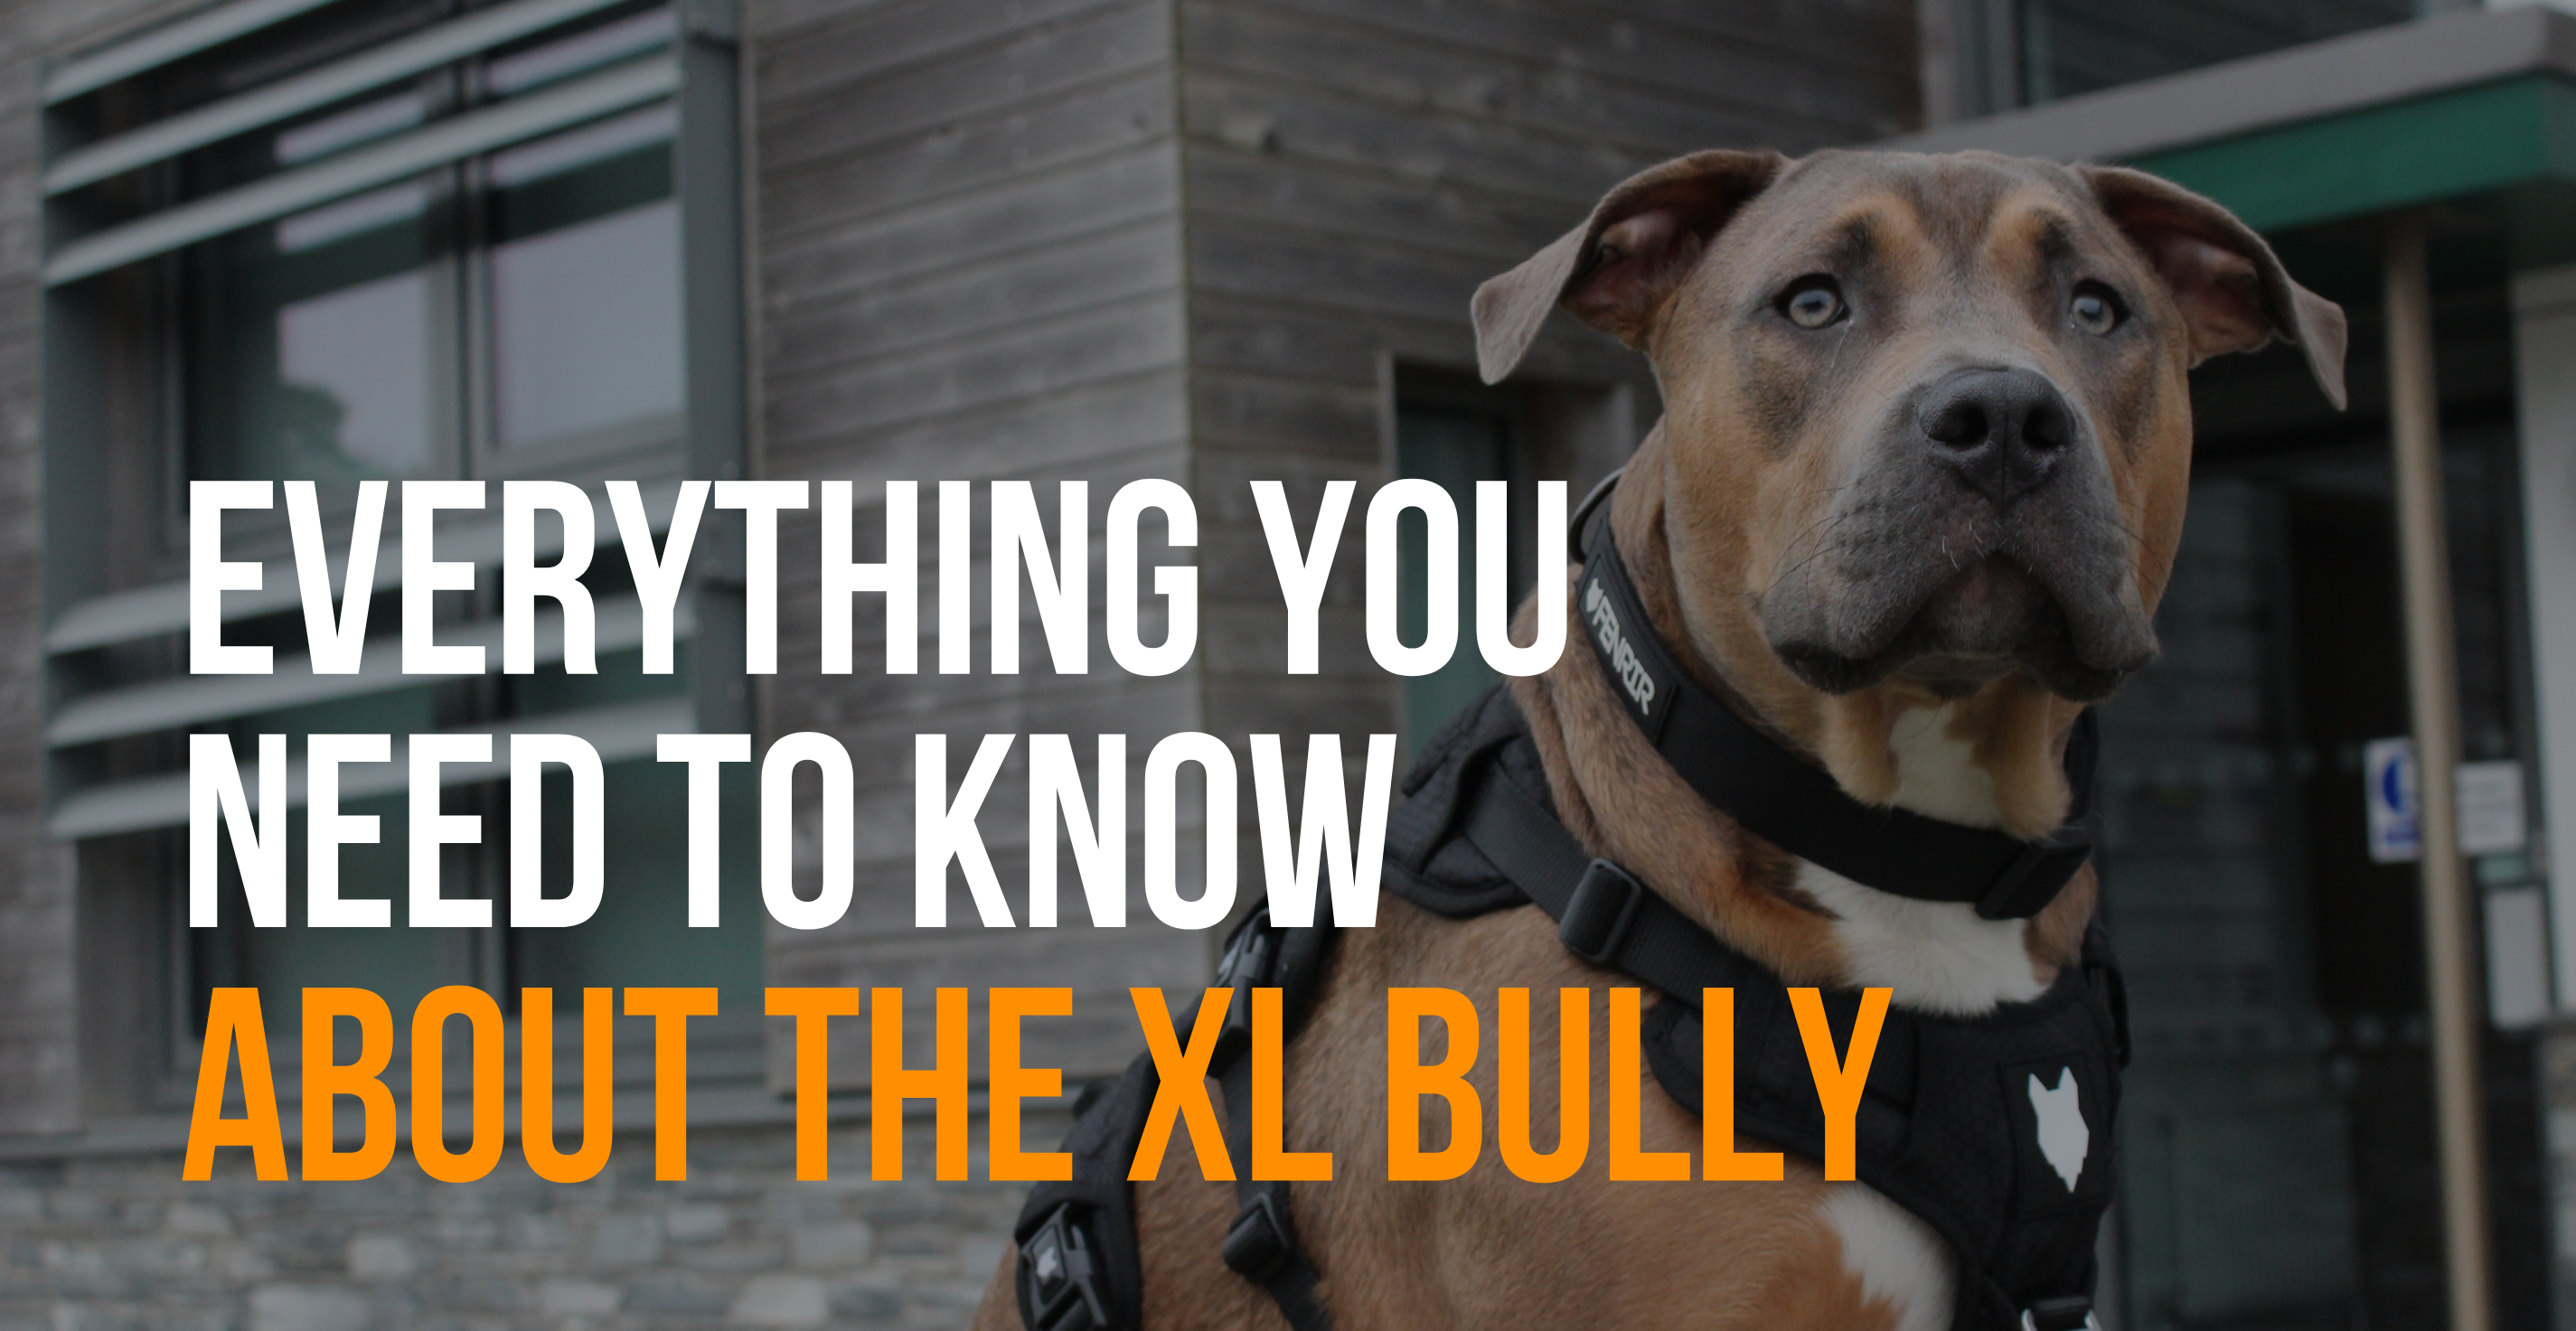 Everything you need to know about the XL Bully – Fenrir Canine Leaders